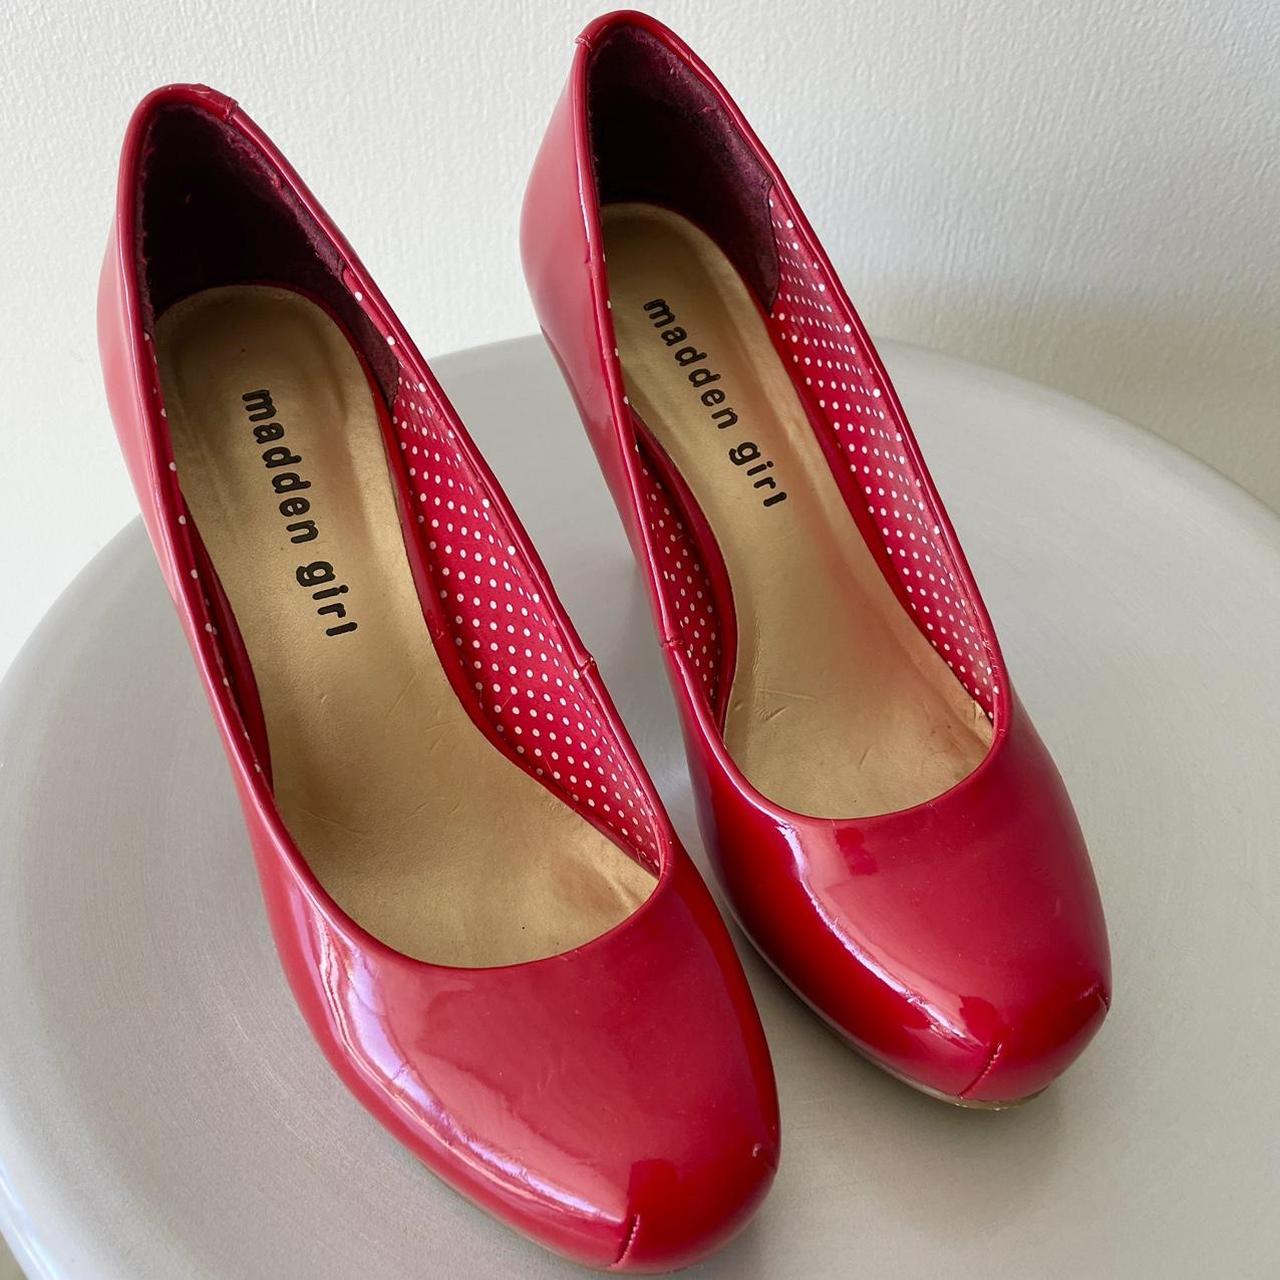 Red patent leather pumps + FREE SHIPPING